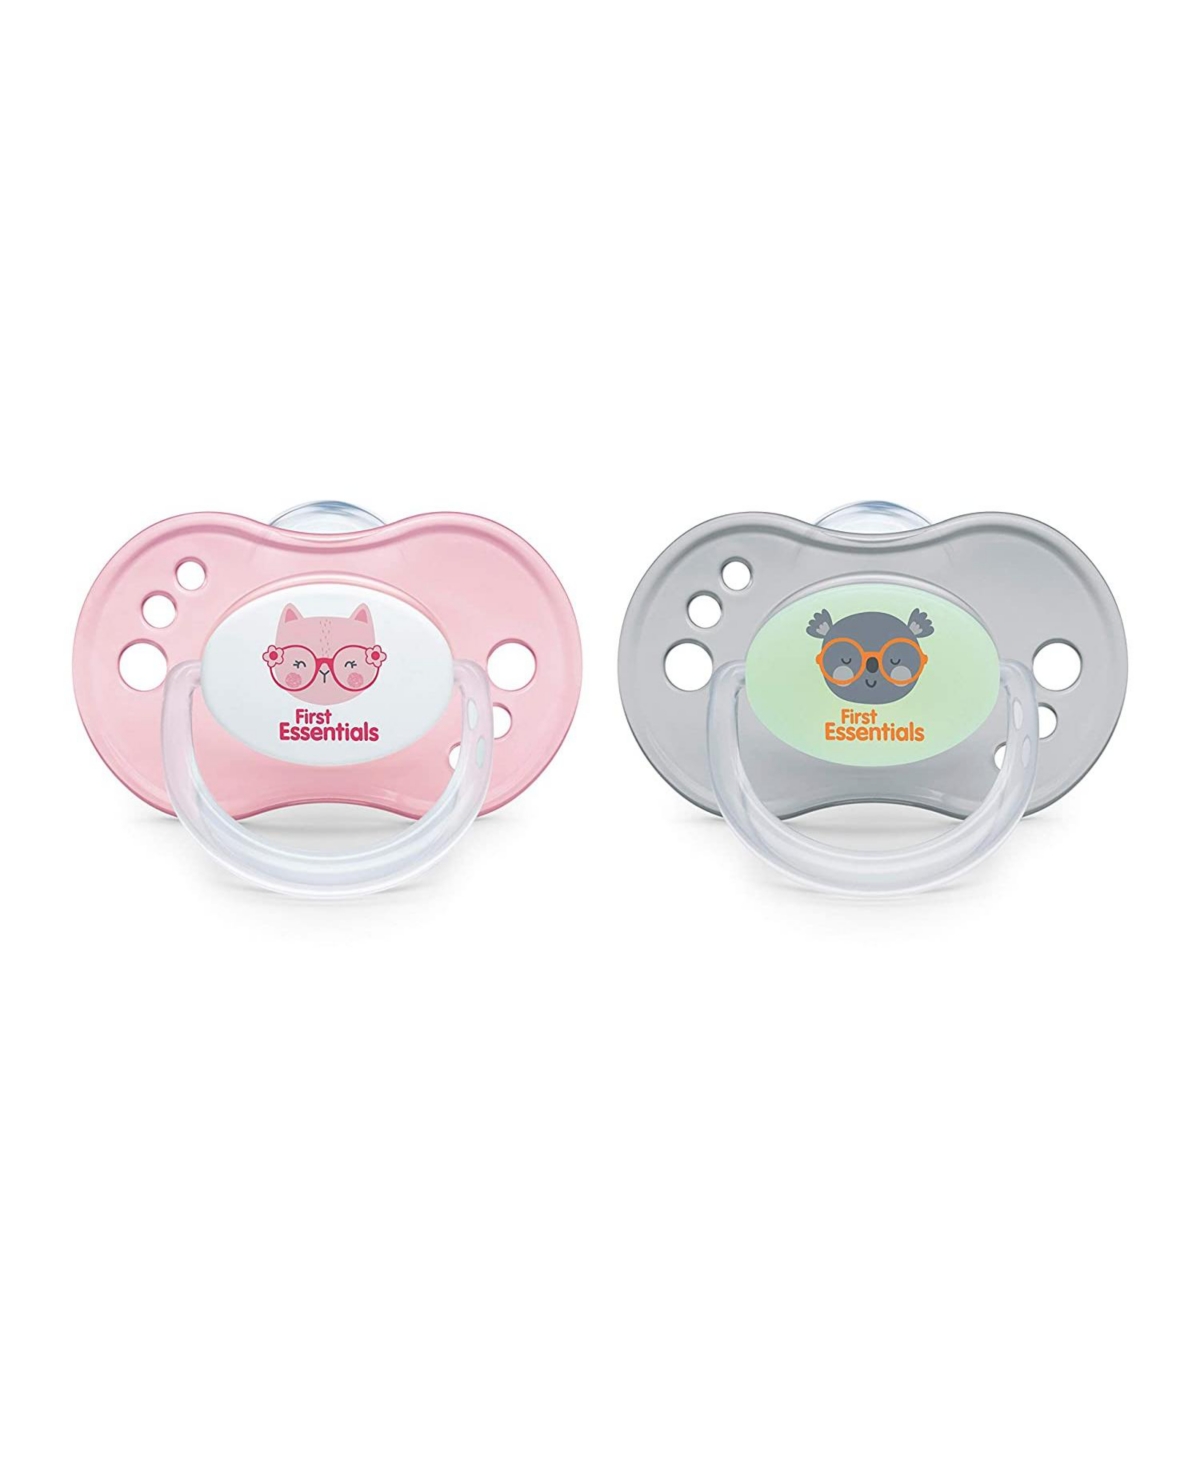 Nuk First Essentials Pacifiers, 6-18 Months, 2 Pack In Assorted Pre-pack